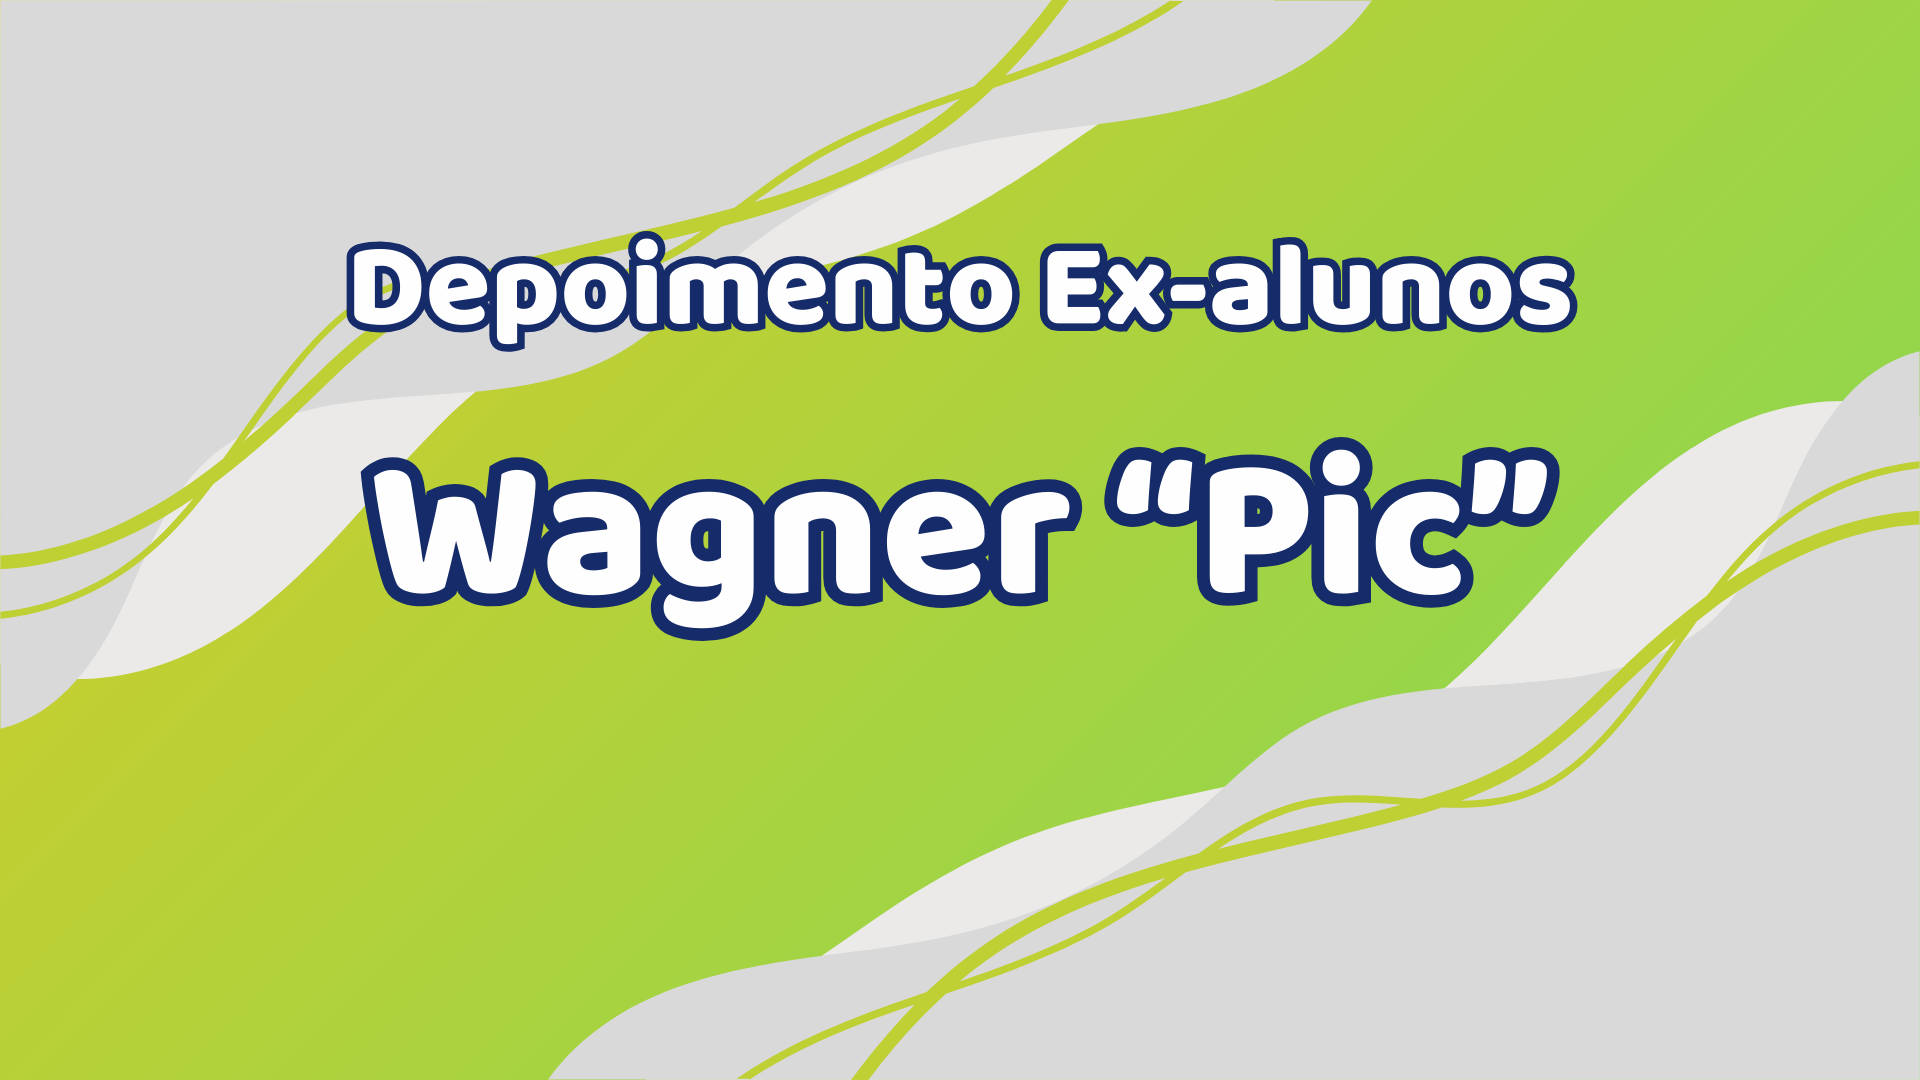 Wagner " Pic "